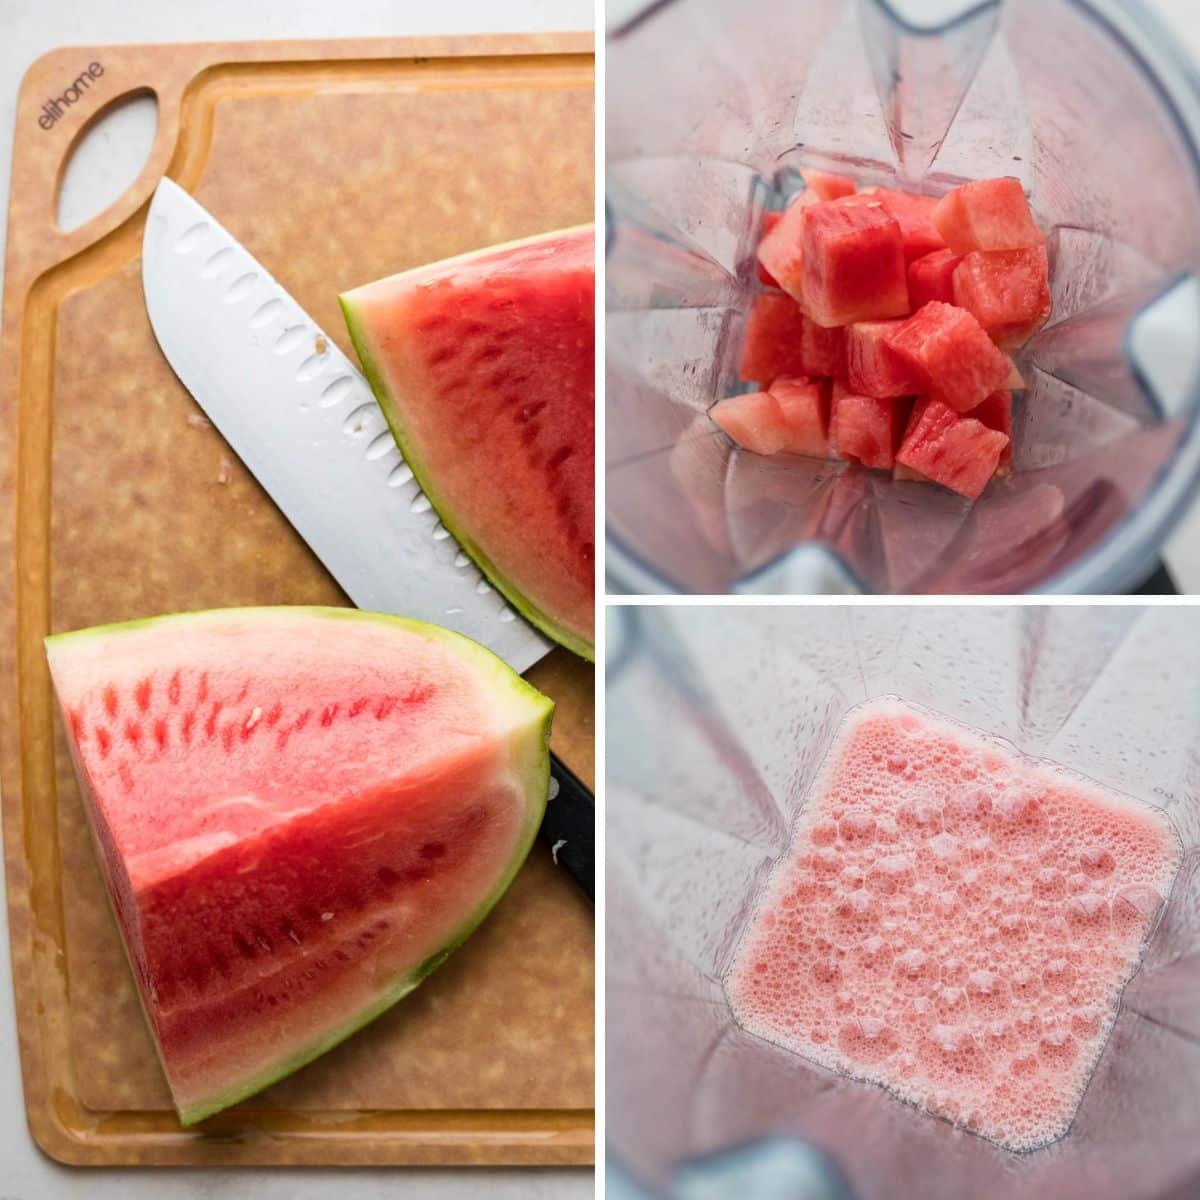 pureeing the watermelon in a blender.